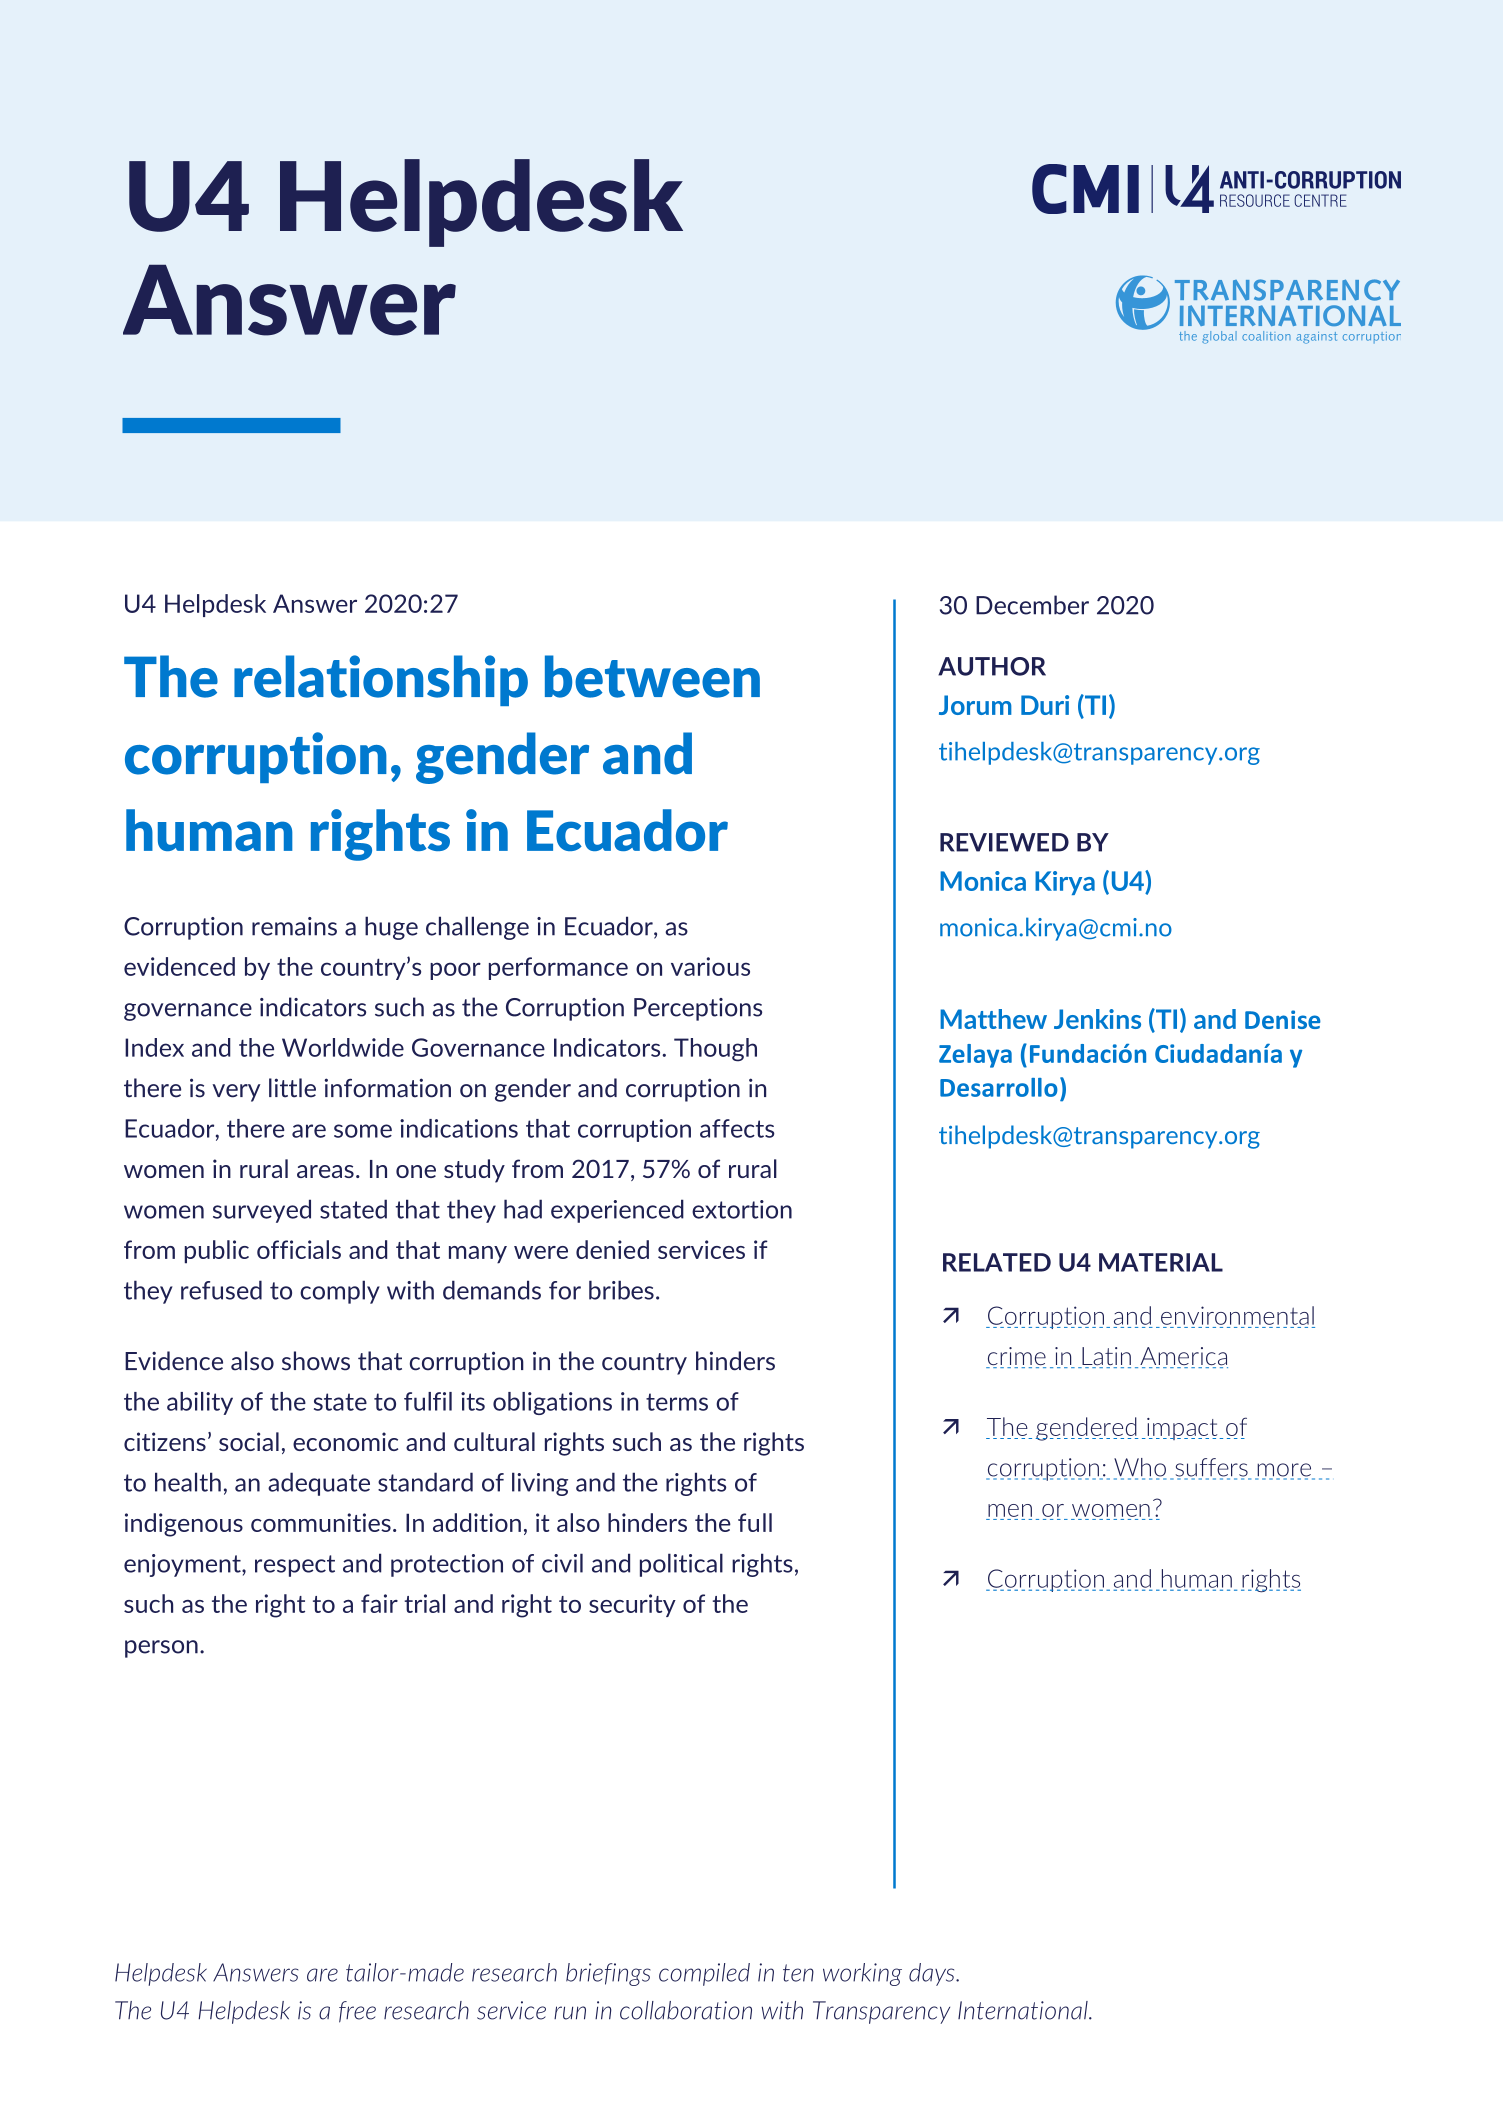 The relationship between corruption, gender and human rights in Ecuador 